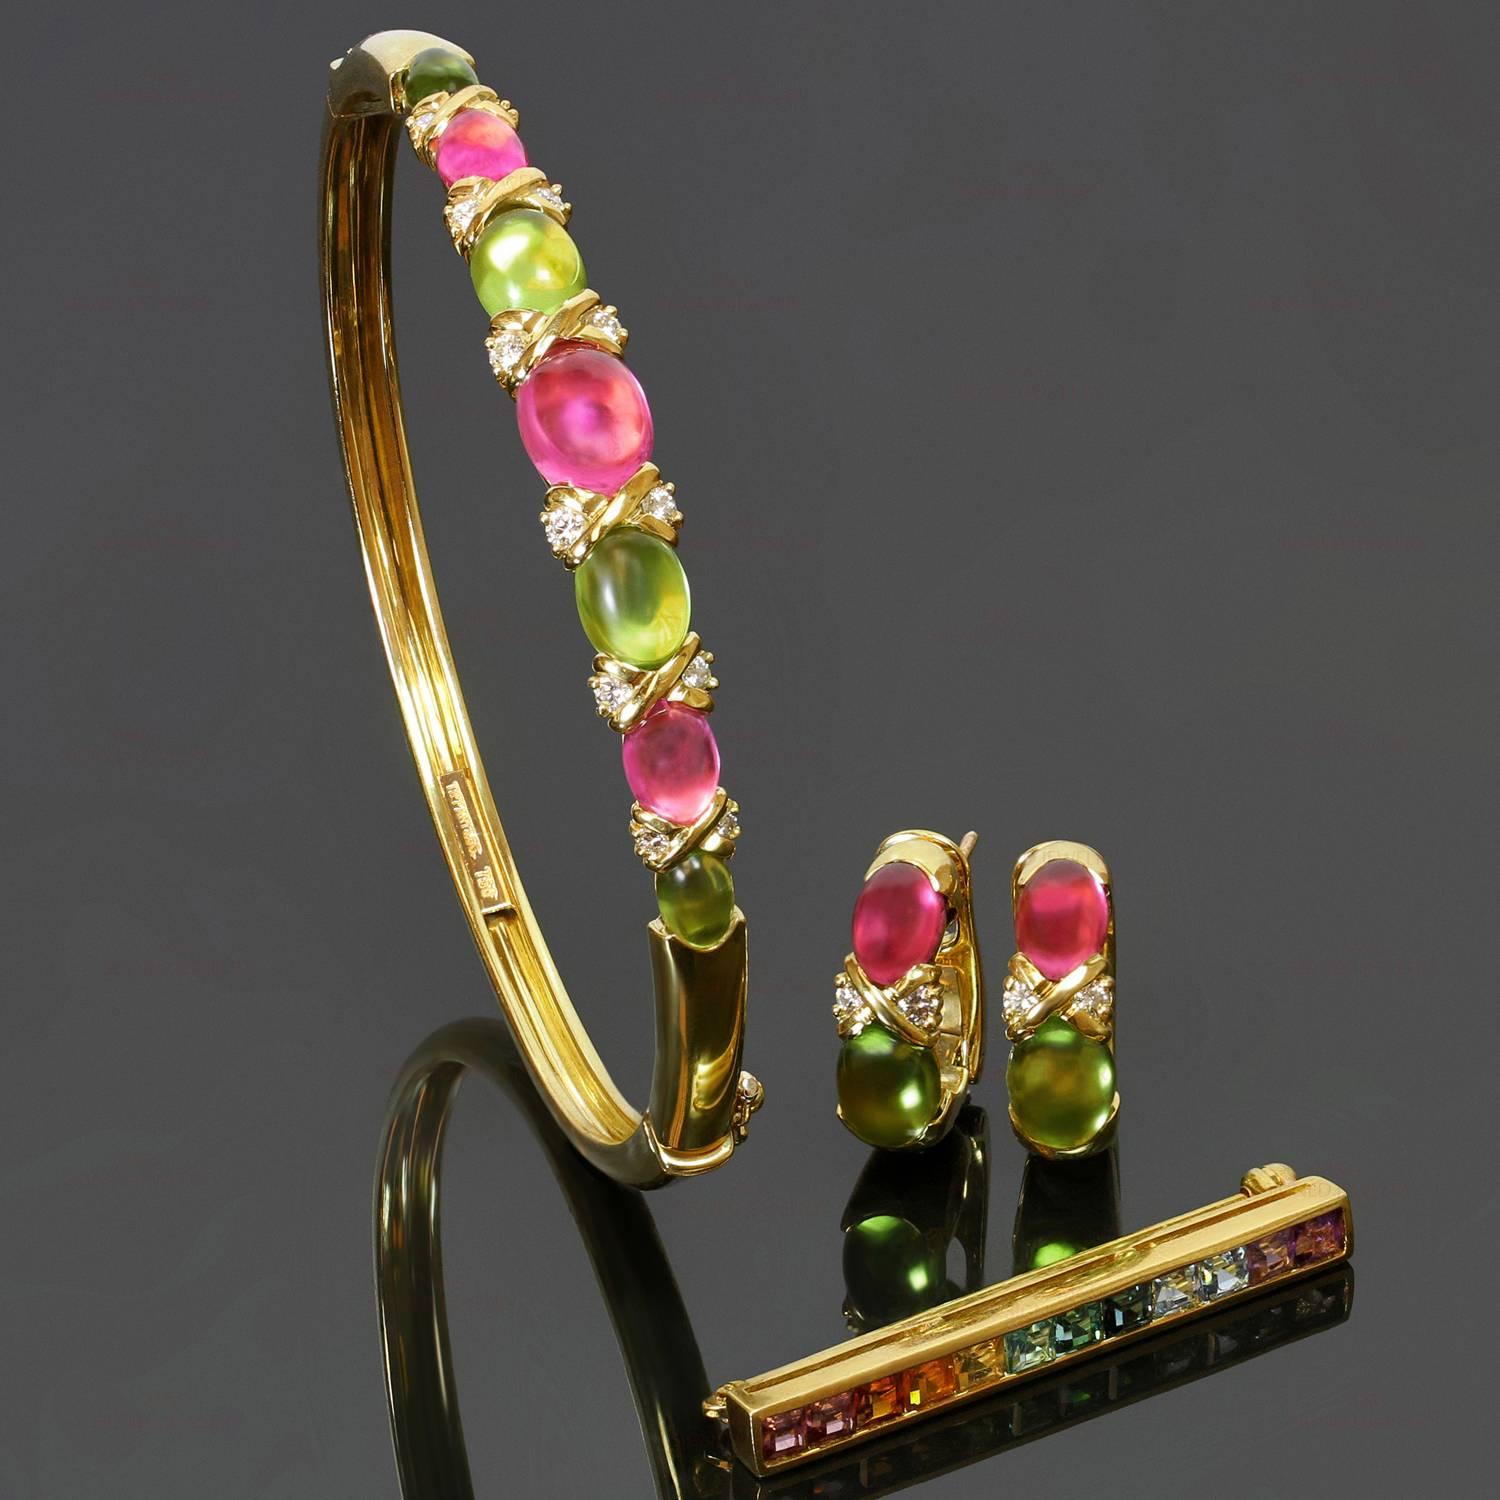 This gorgeous Tiffany jewelry set consists of a bangle bracelet, lever-back earrings, and a bar brooch. The bracelet and earrings are set with cabochon oval pink tourmaline and peridot stones and accented with full-cut diamonds weighing an estimated